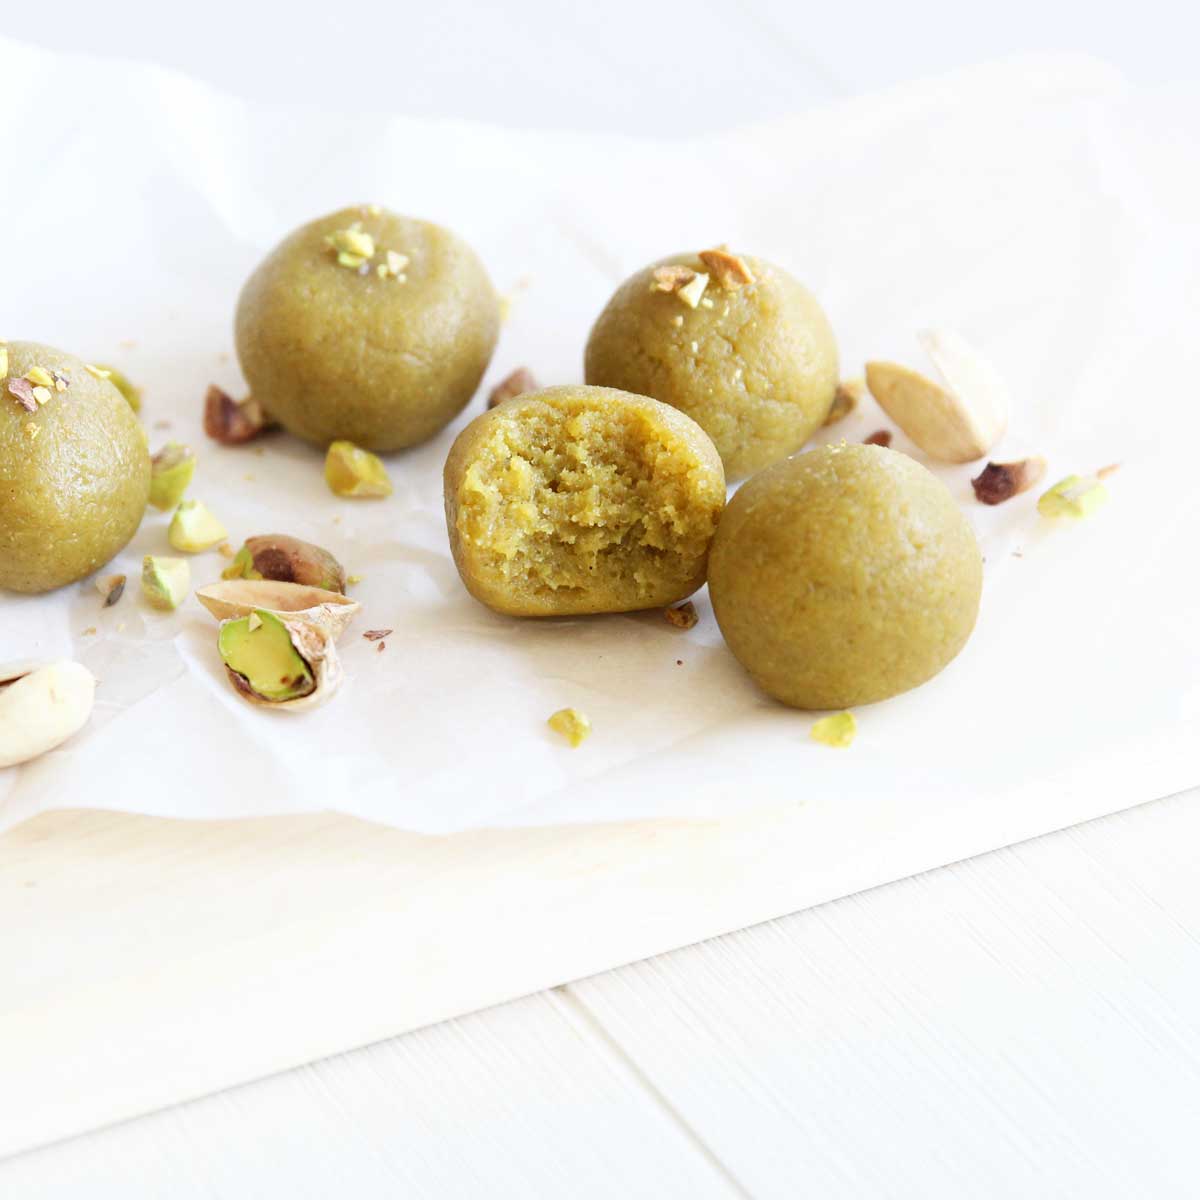 Keto Pistachio Cheesecake Protein Balls (Low Carb Energy Bites made with Collagen Peptides) - Matcha Latte Protein Balls